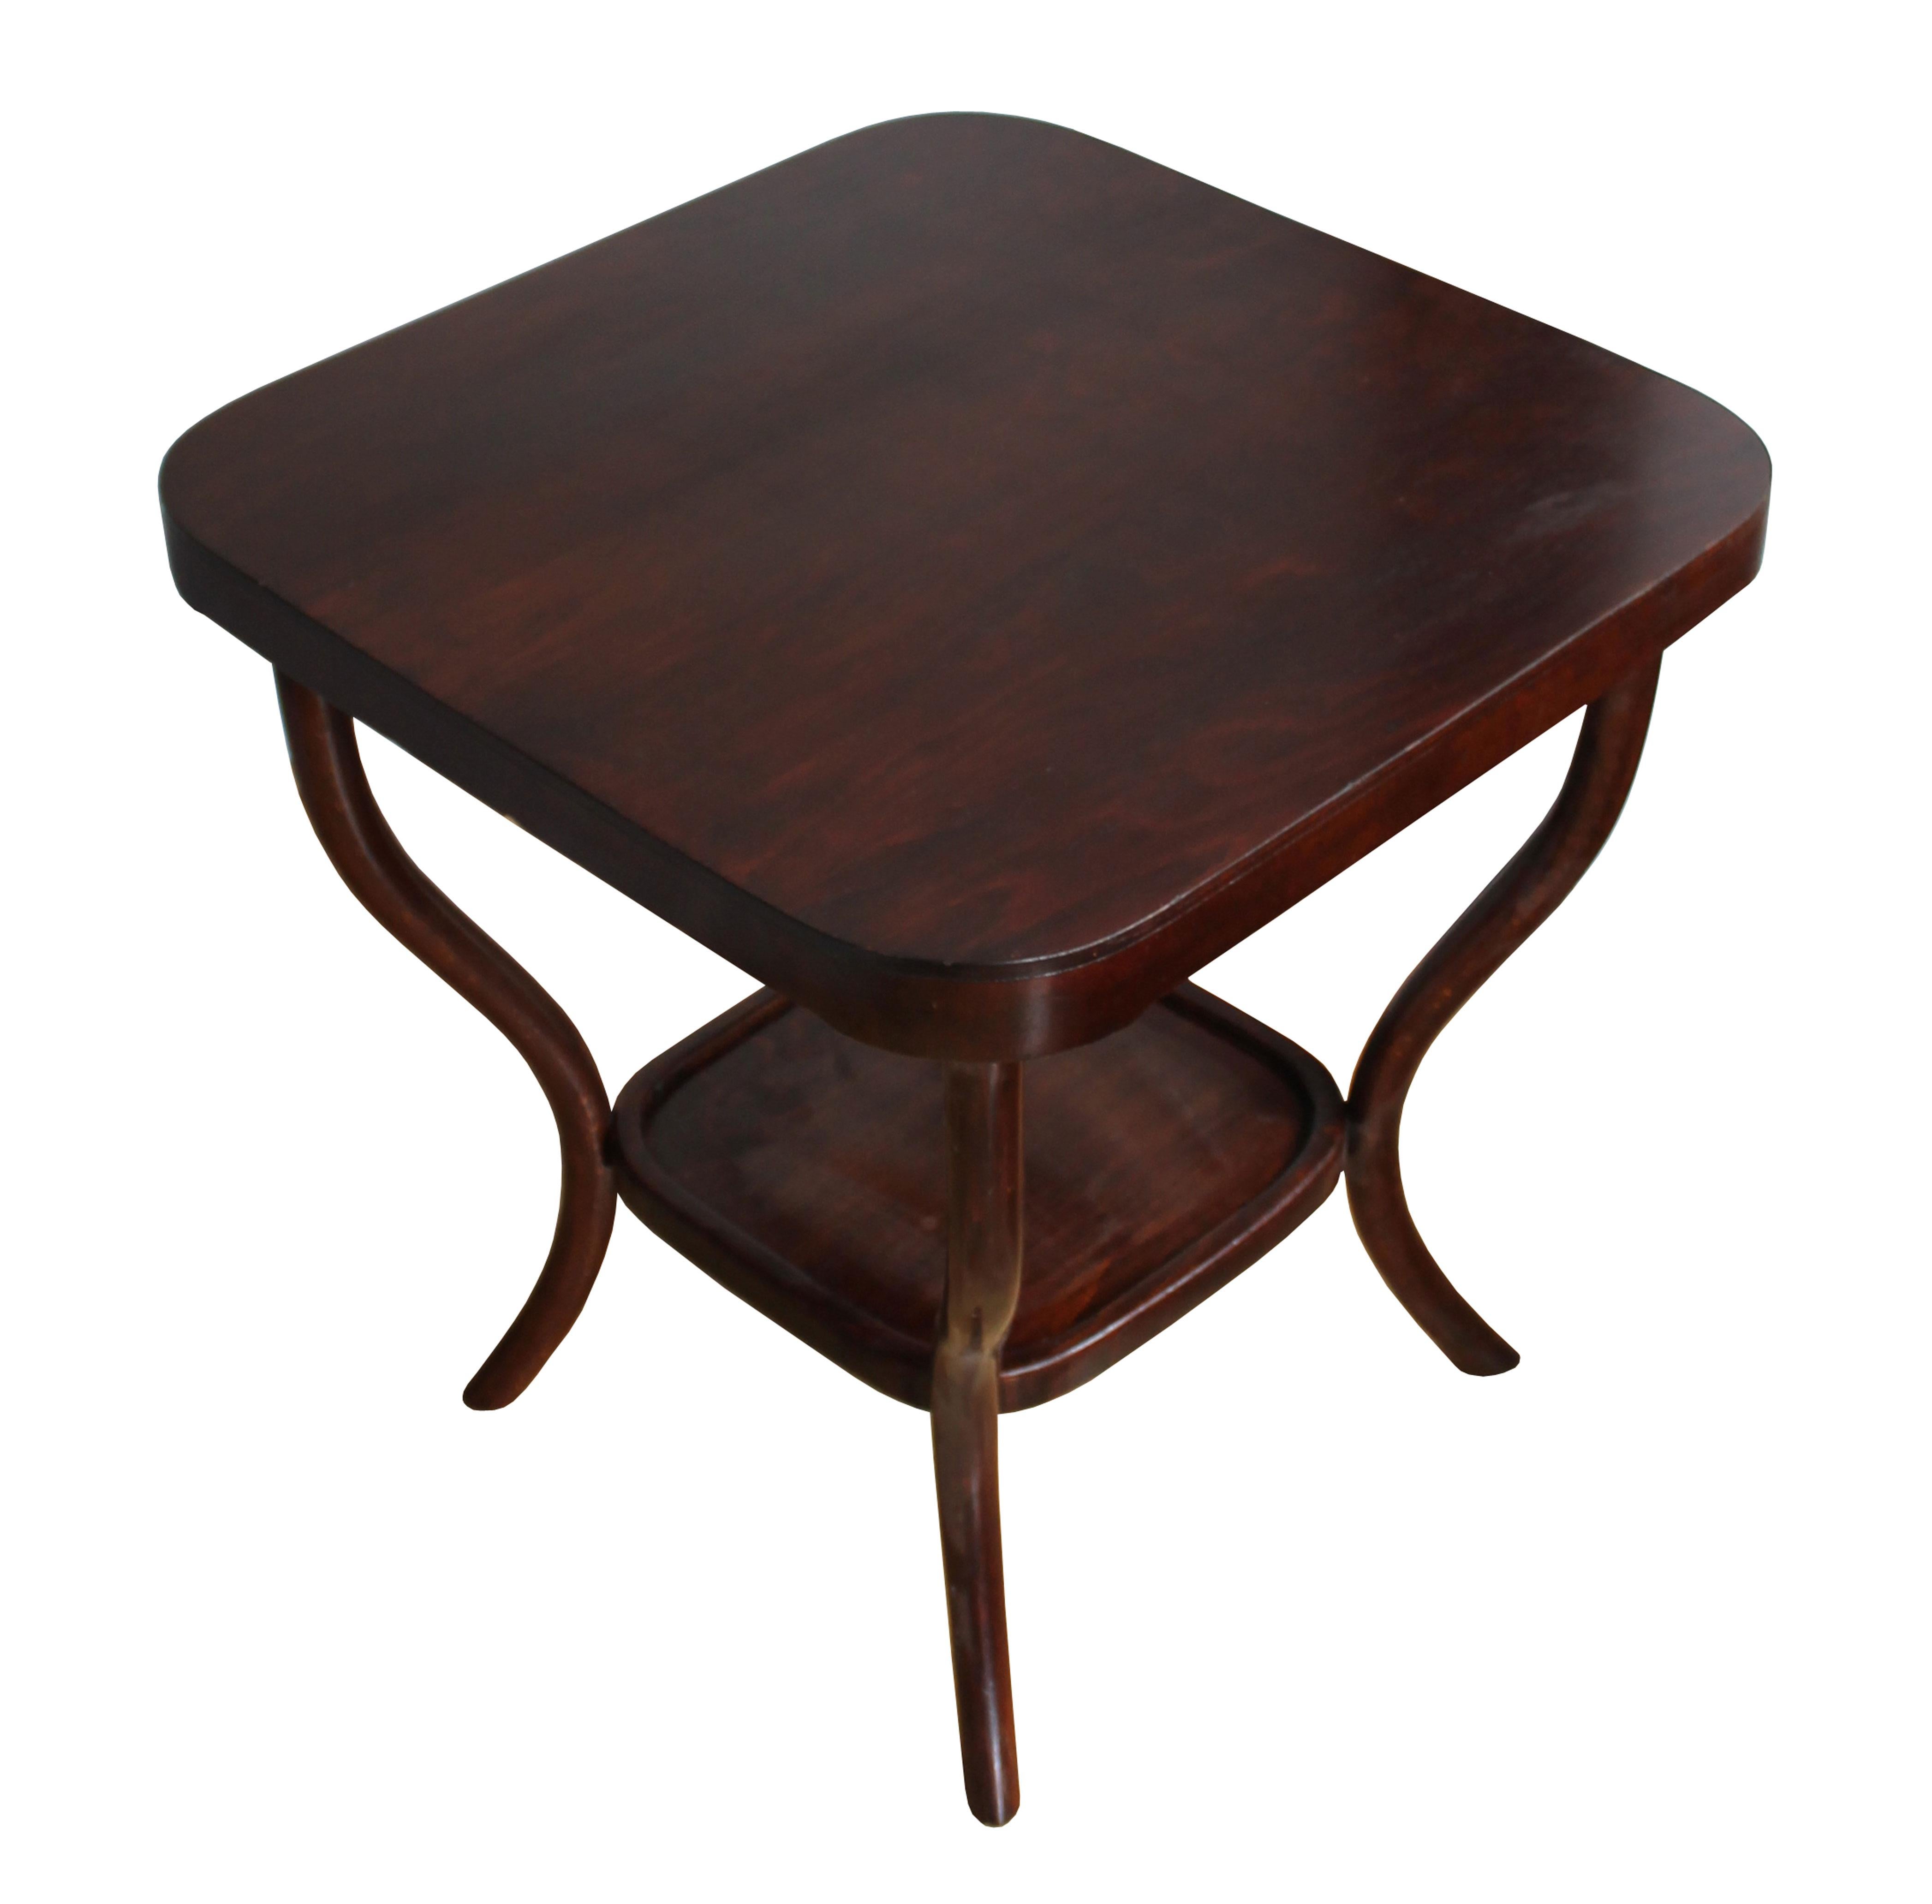 A rare square table for playing cards or board games originally designed by the Thonet company at the end of the 19th Century. It can be found in Thonet sales catalogues as model number 8. This particular piece is believed to be made by the Thonet